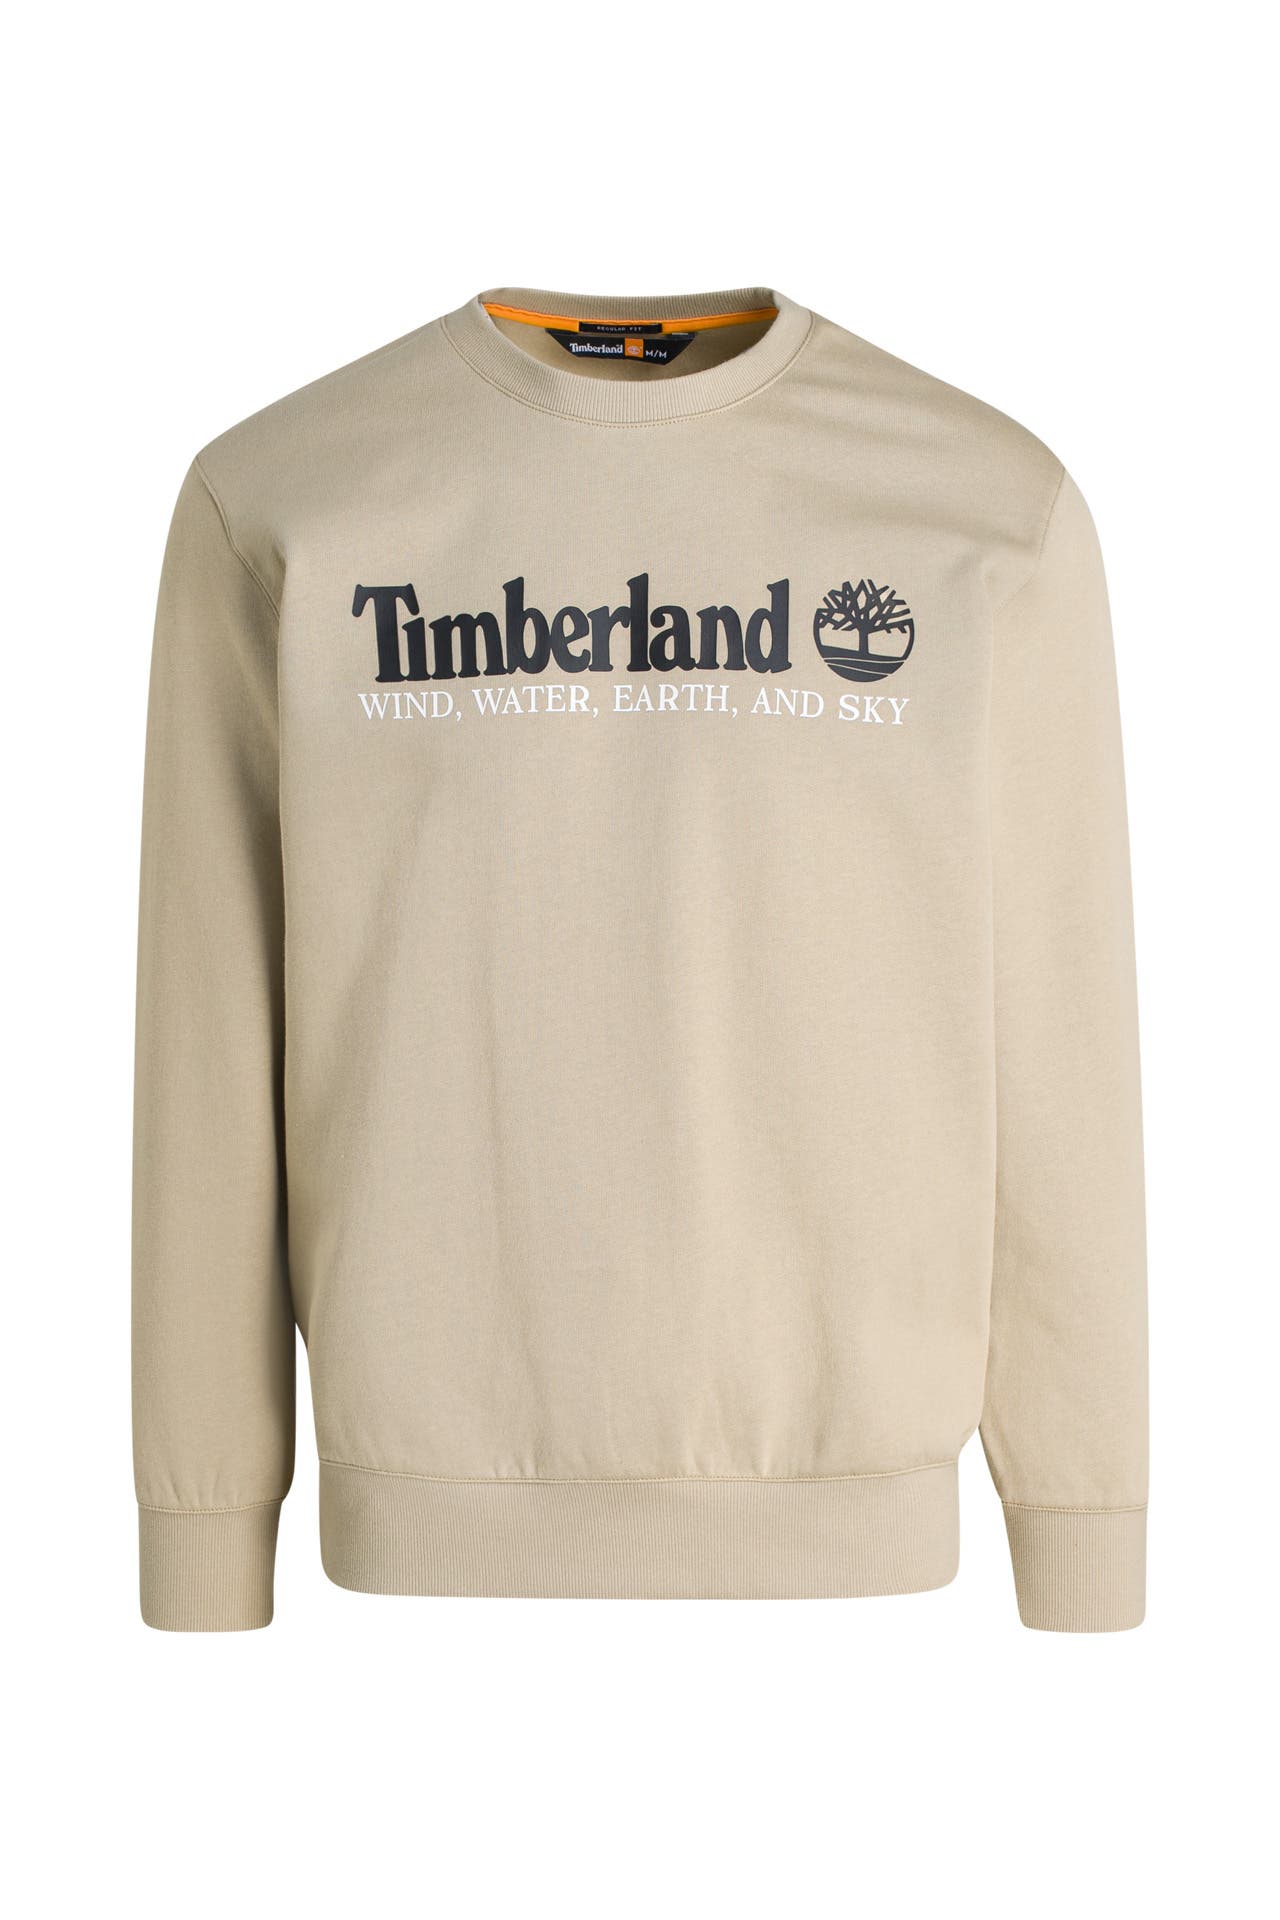 Timberland OUTLET in Germany • Sale up to 70%* off | Outletcity Metzingen